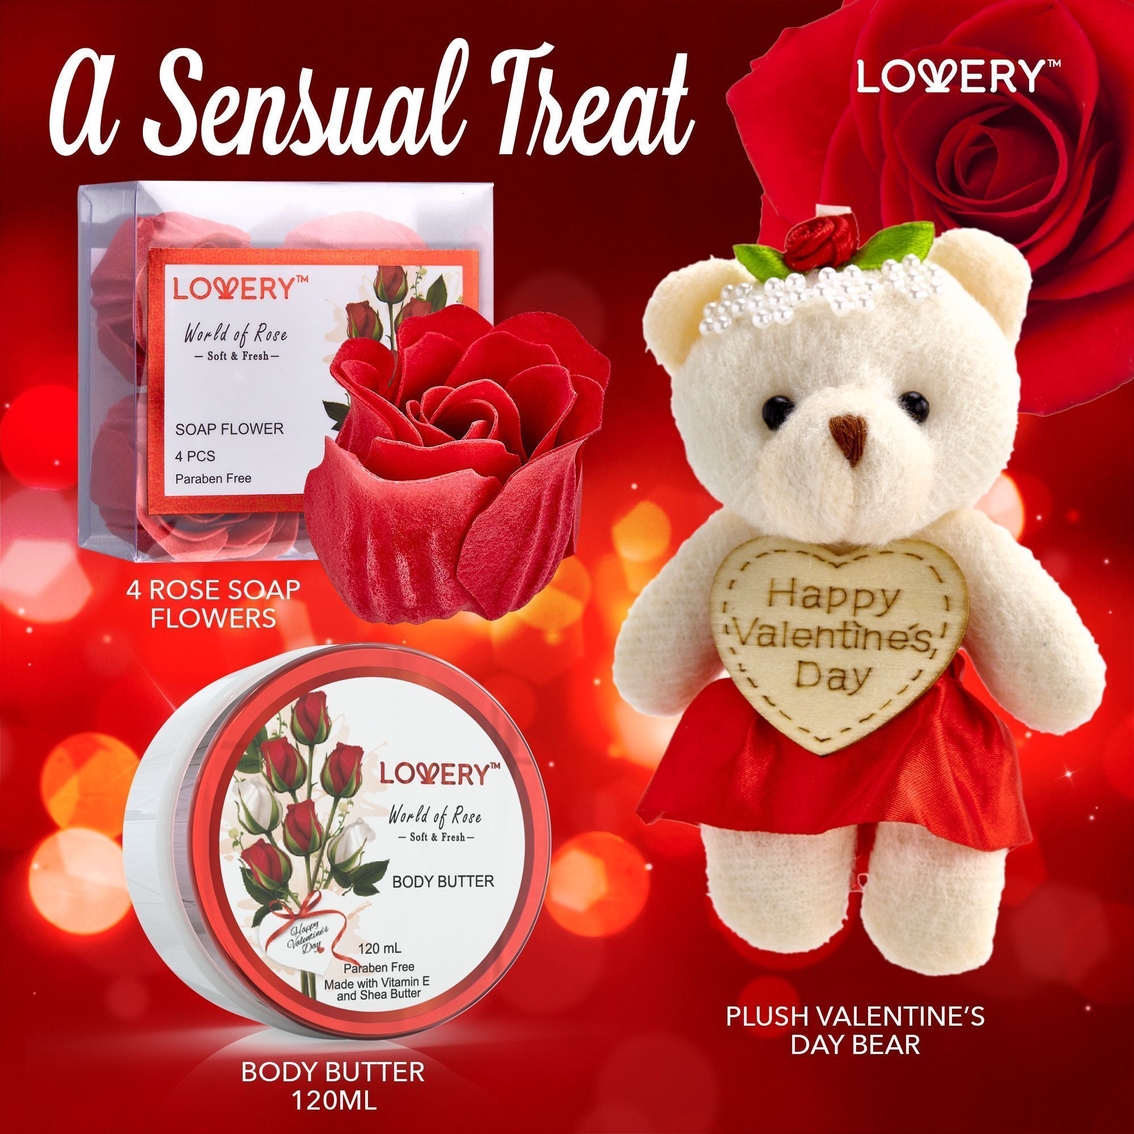 Lovery Mother's Day Spa Gift Basket - Red Rose Scented - Image 3 of 5